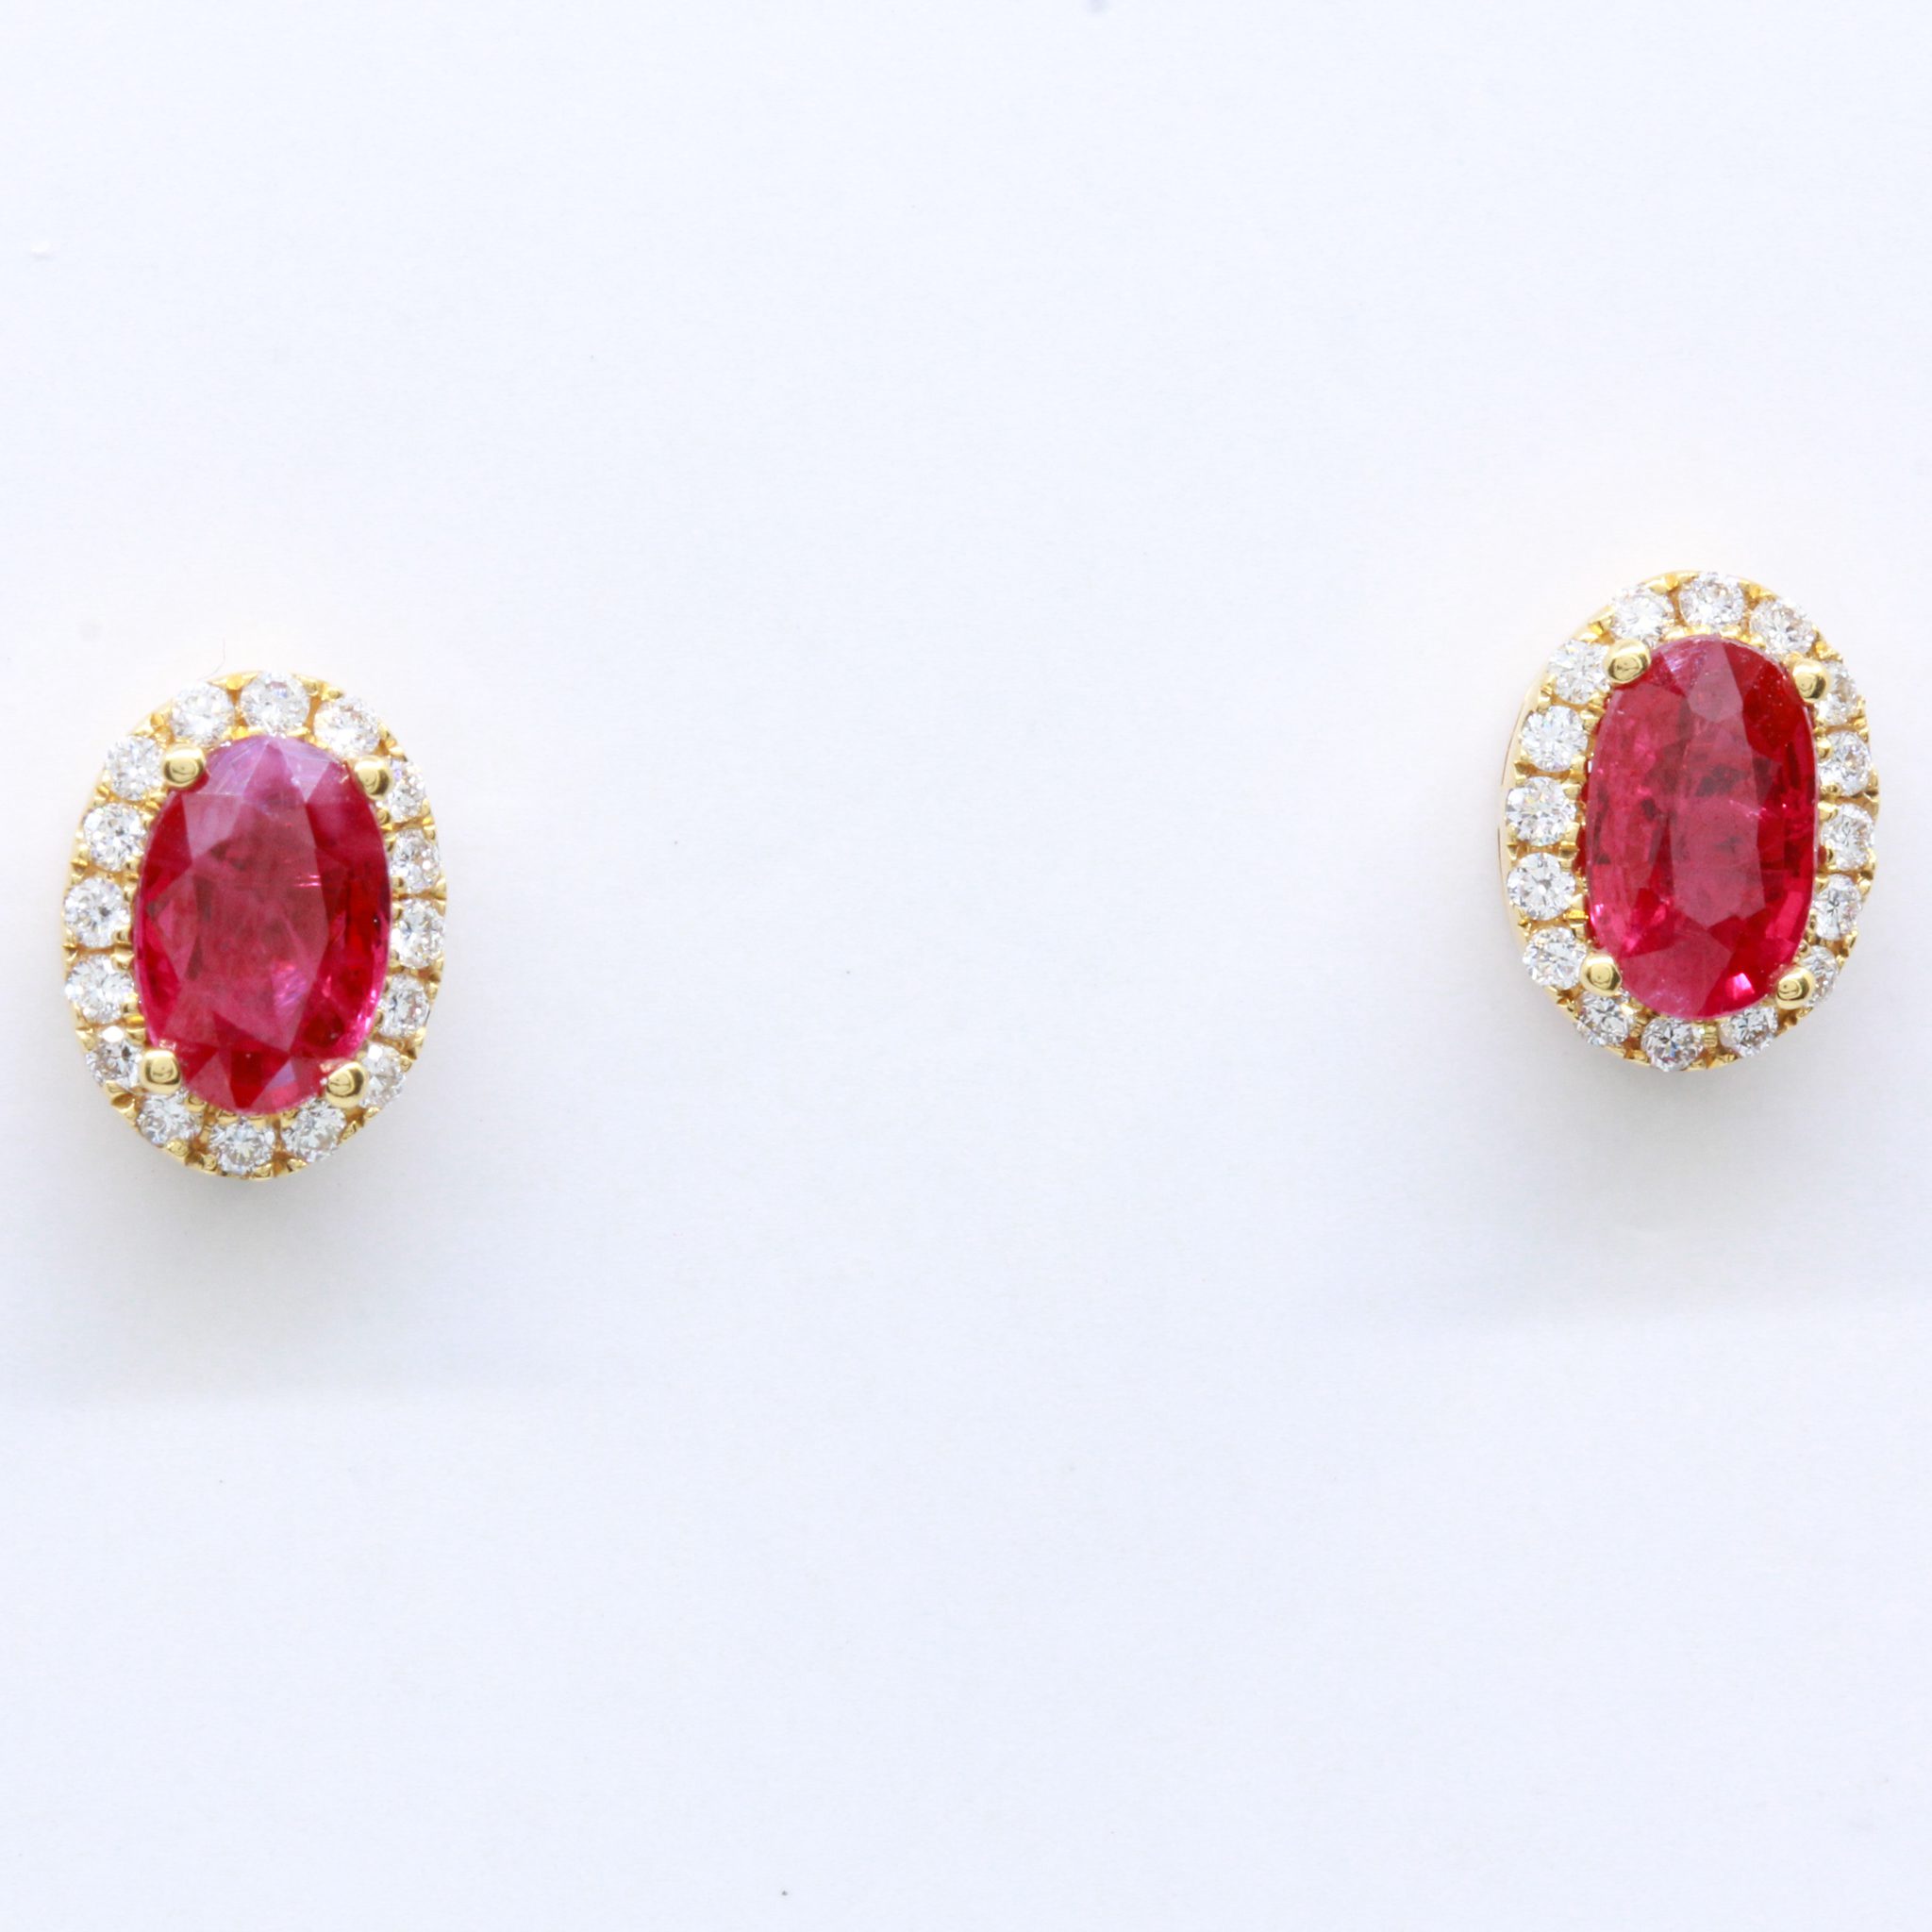 18ct Yellow Gold Ruby and Diamond Earrings | Allgem Jewellers